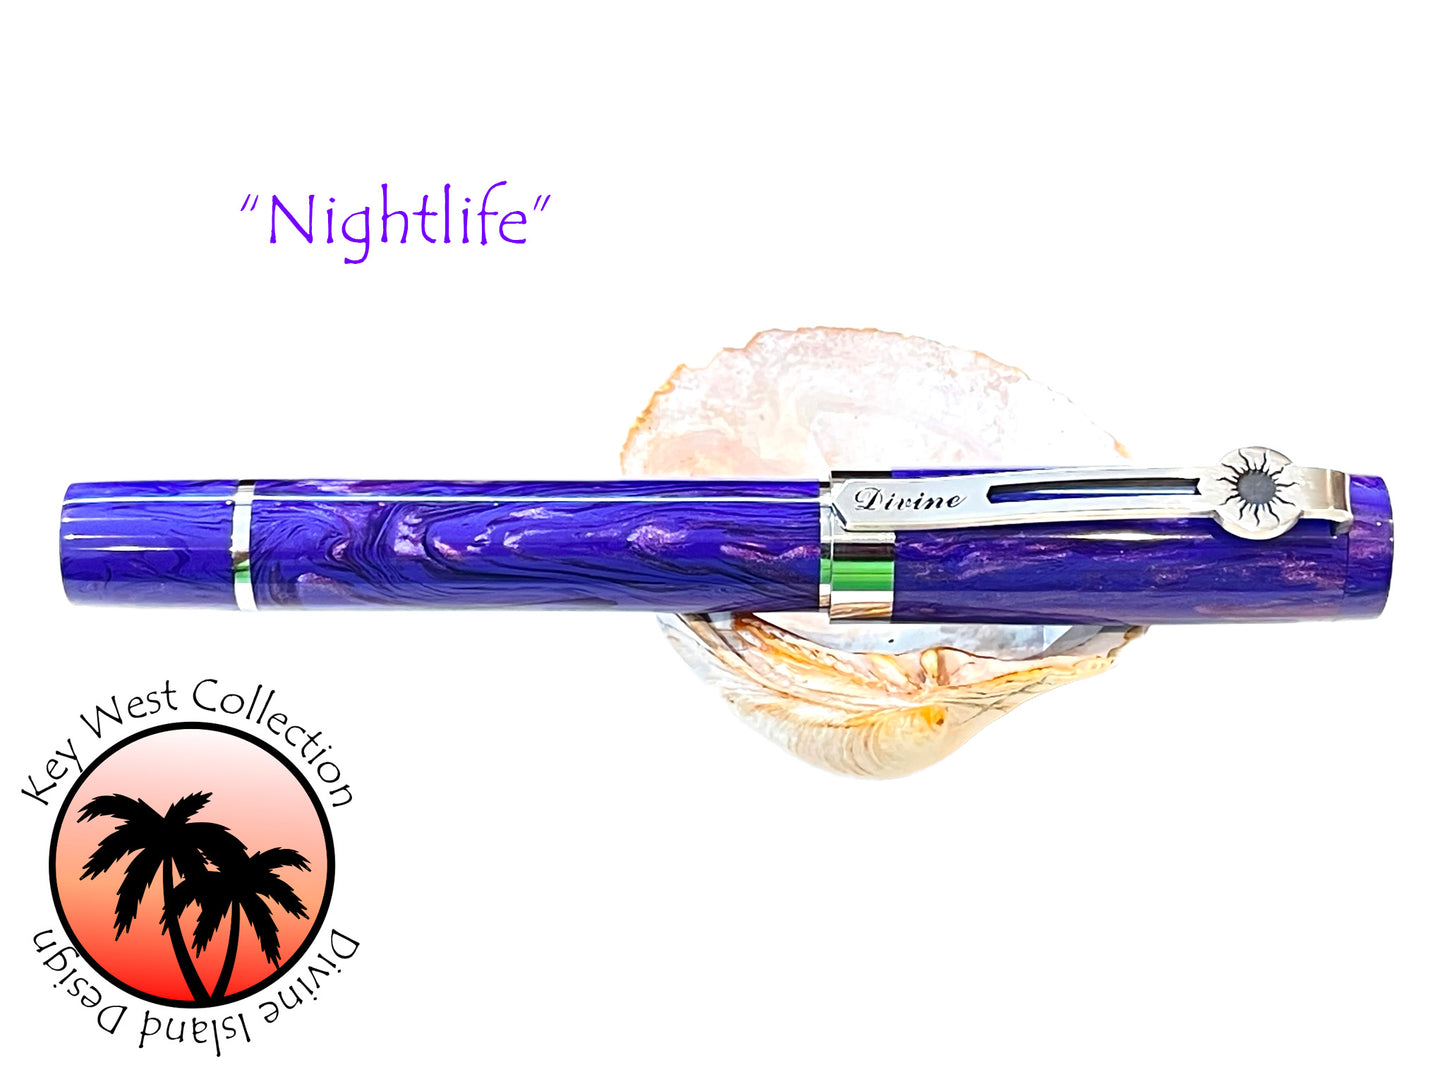 Key West Collection - "Nightlife"